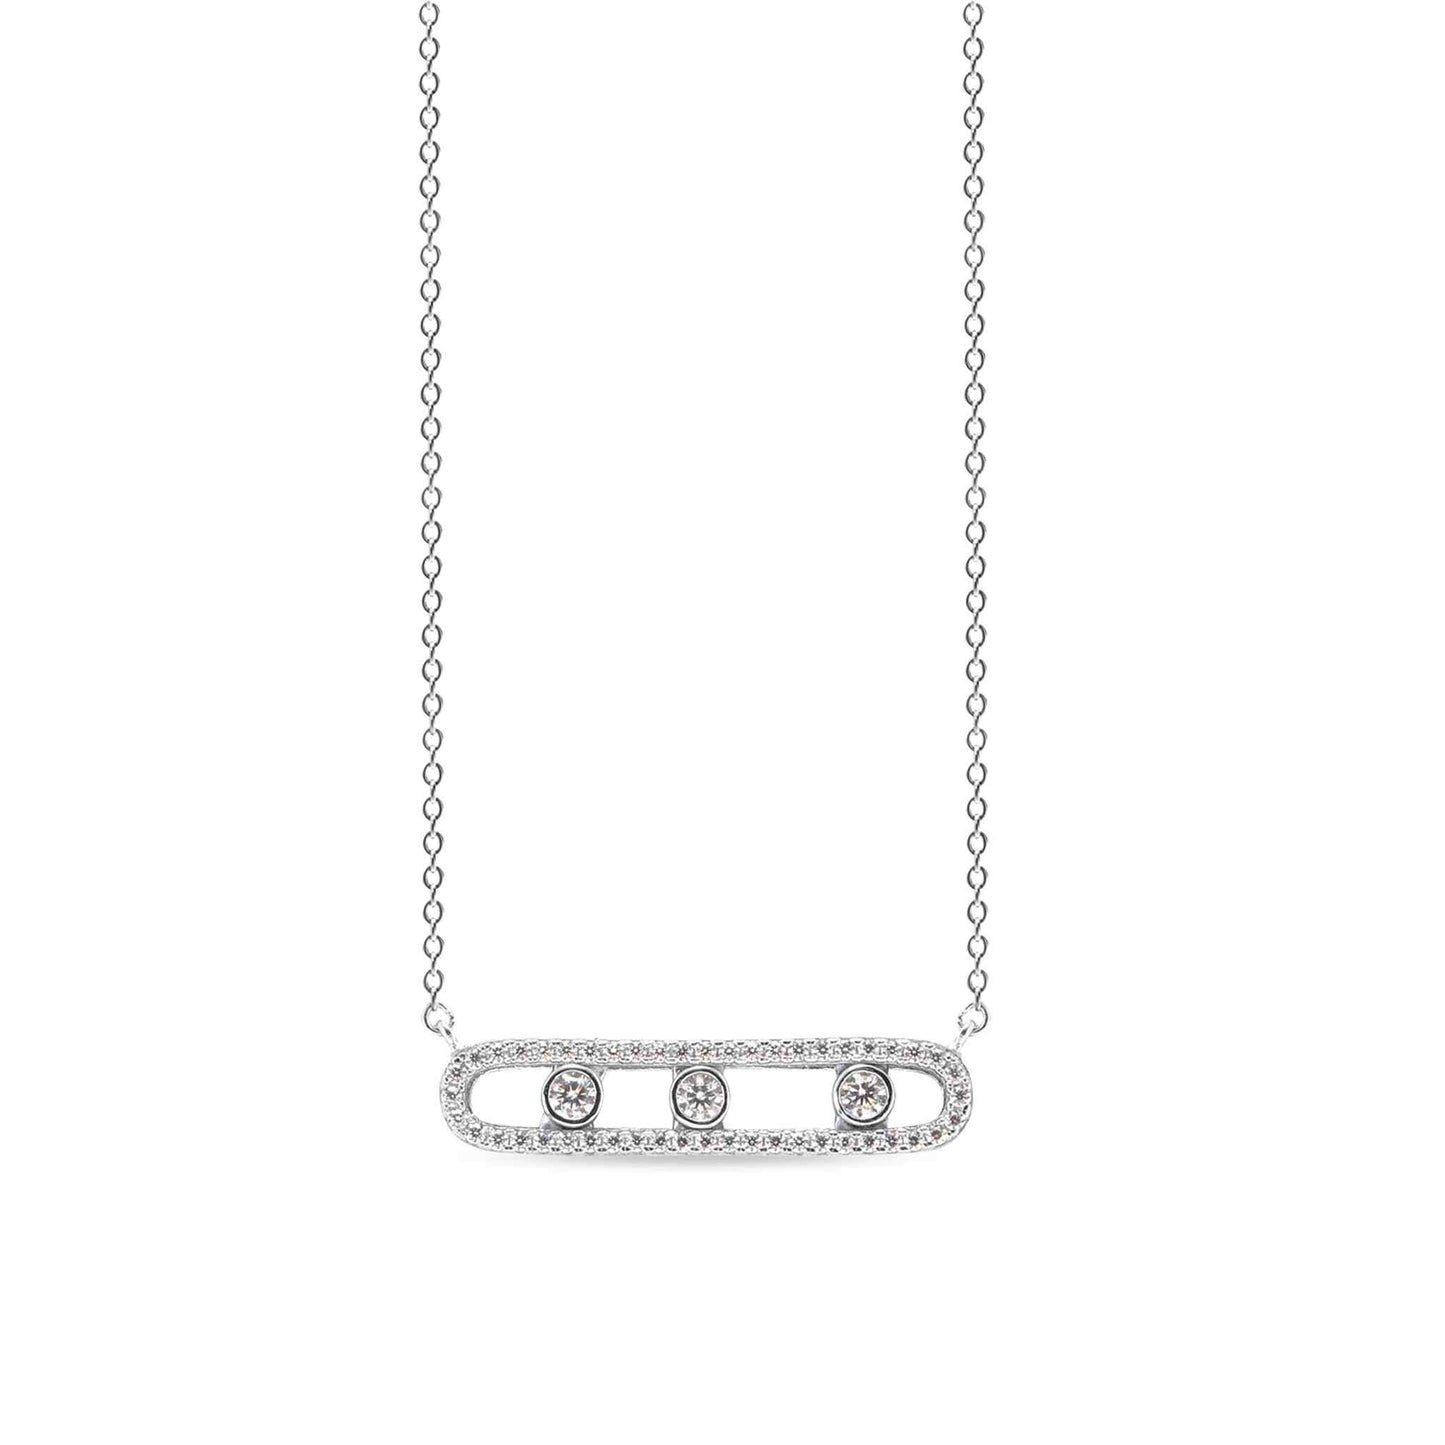 A rectangular floating stones necklace with simulated diamonds displayed on a neutral white background.